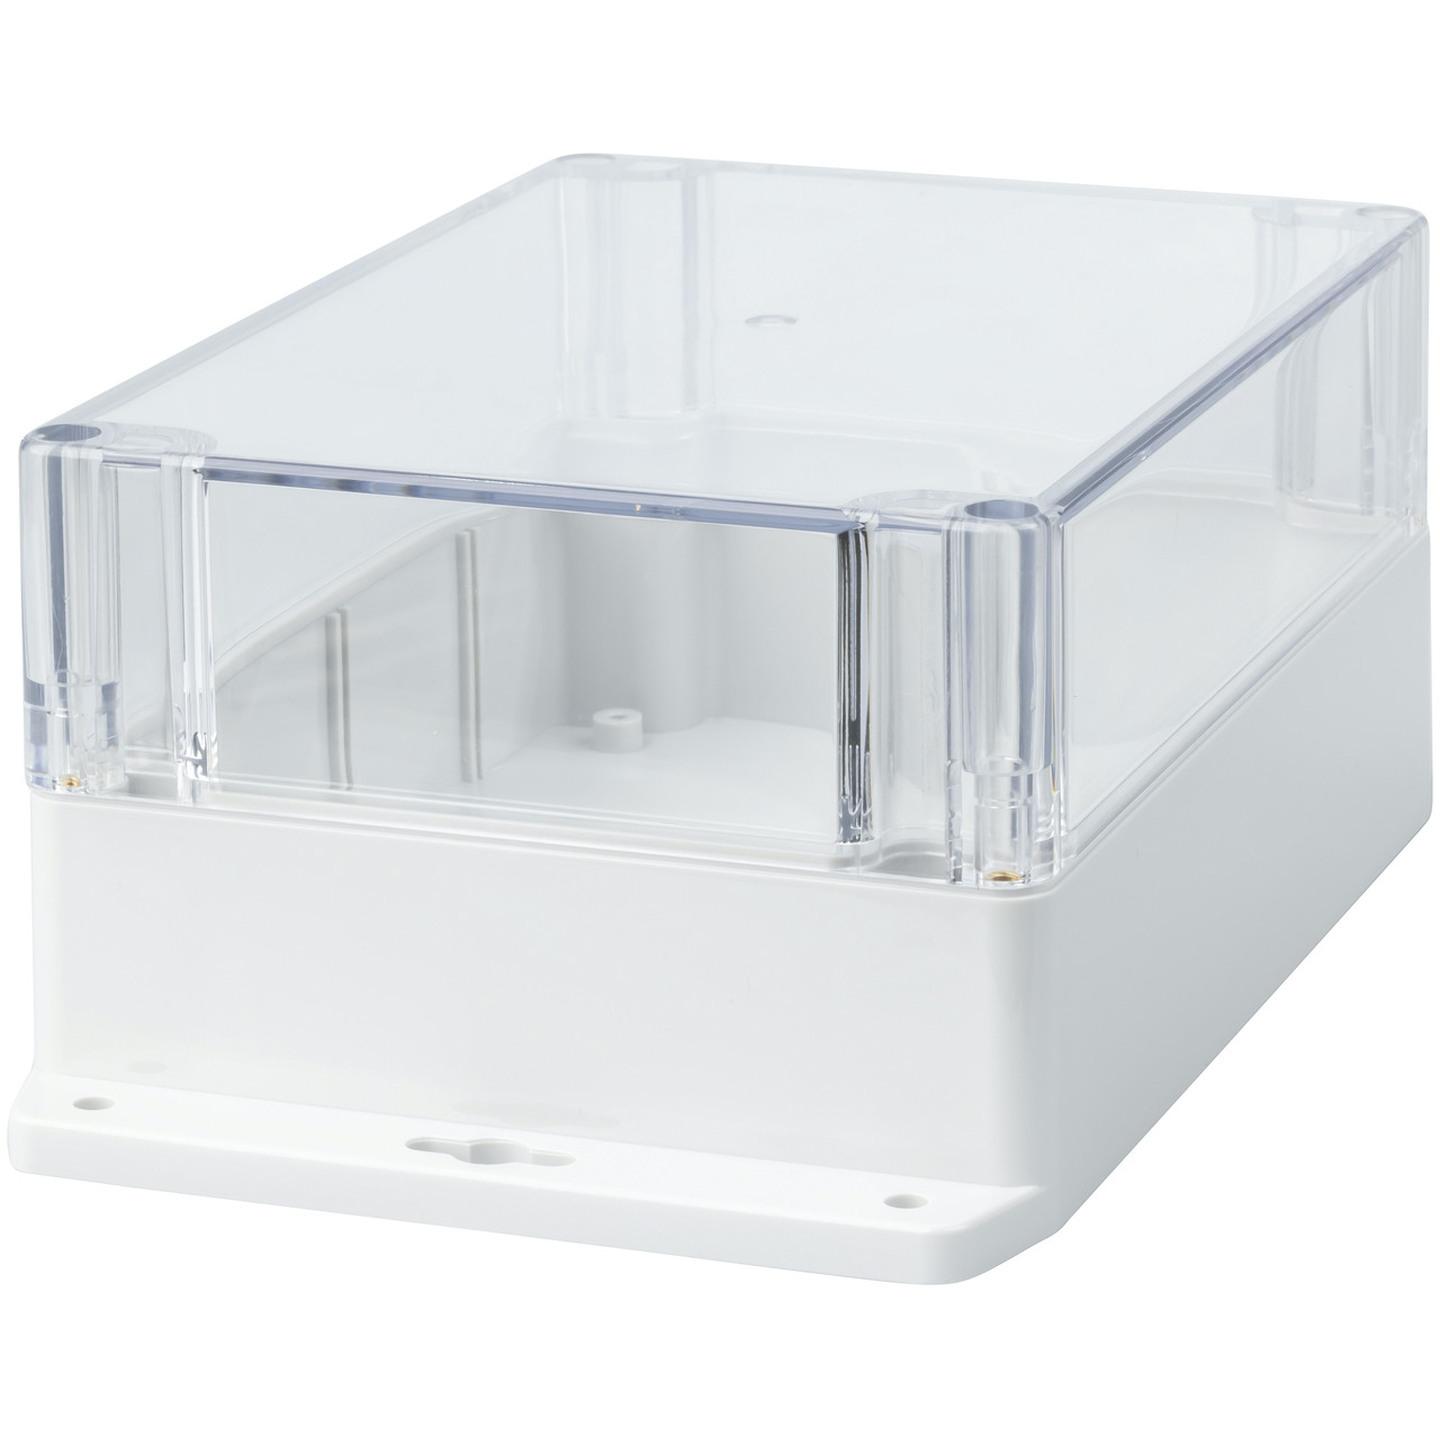 Sealed Polycarbonate Enclosure with Mounting Flange 171W x 121D x 80Hmm